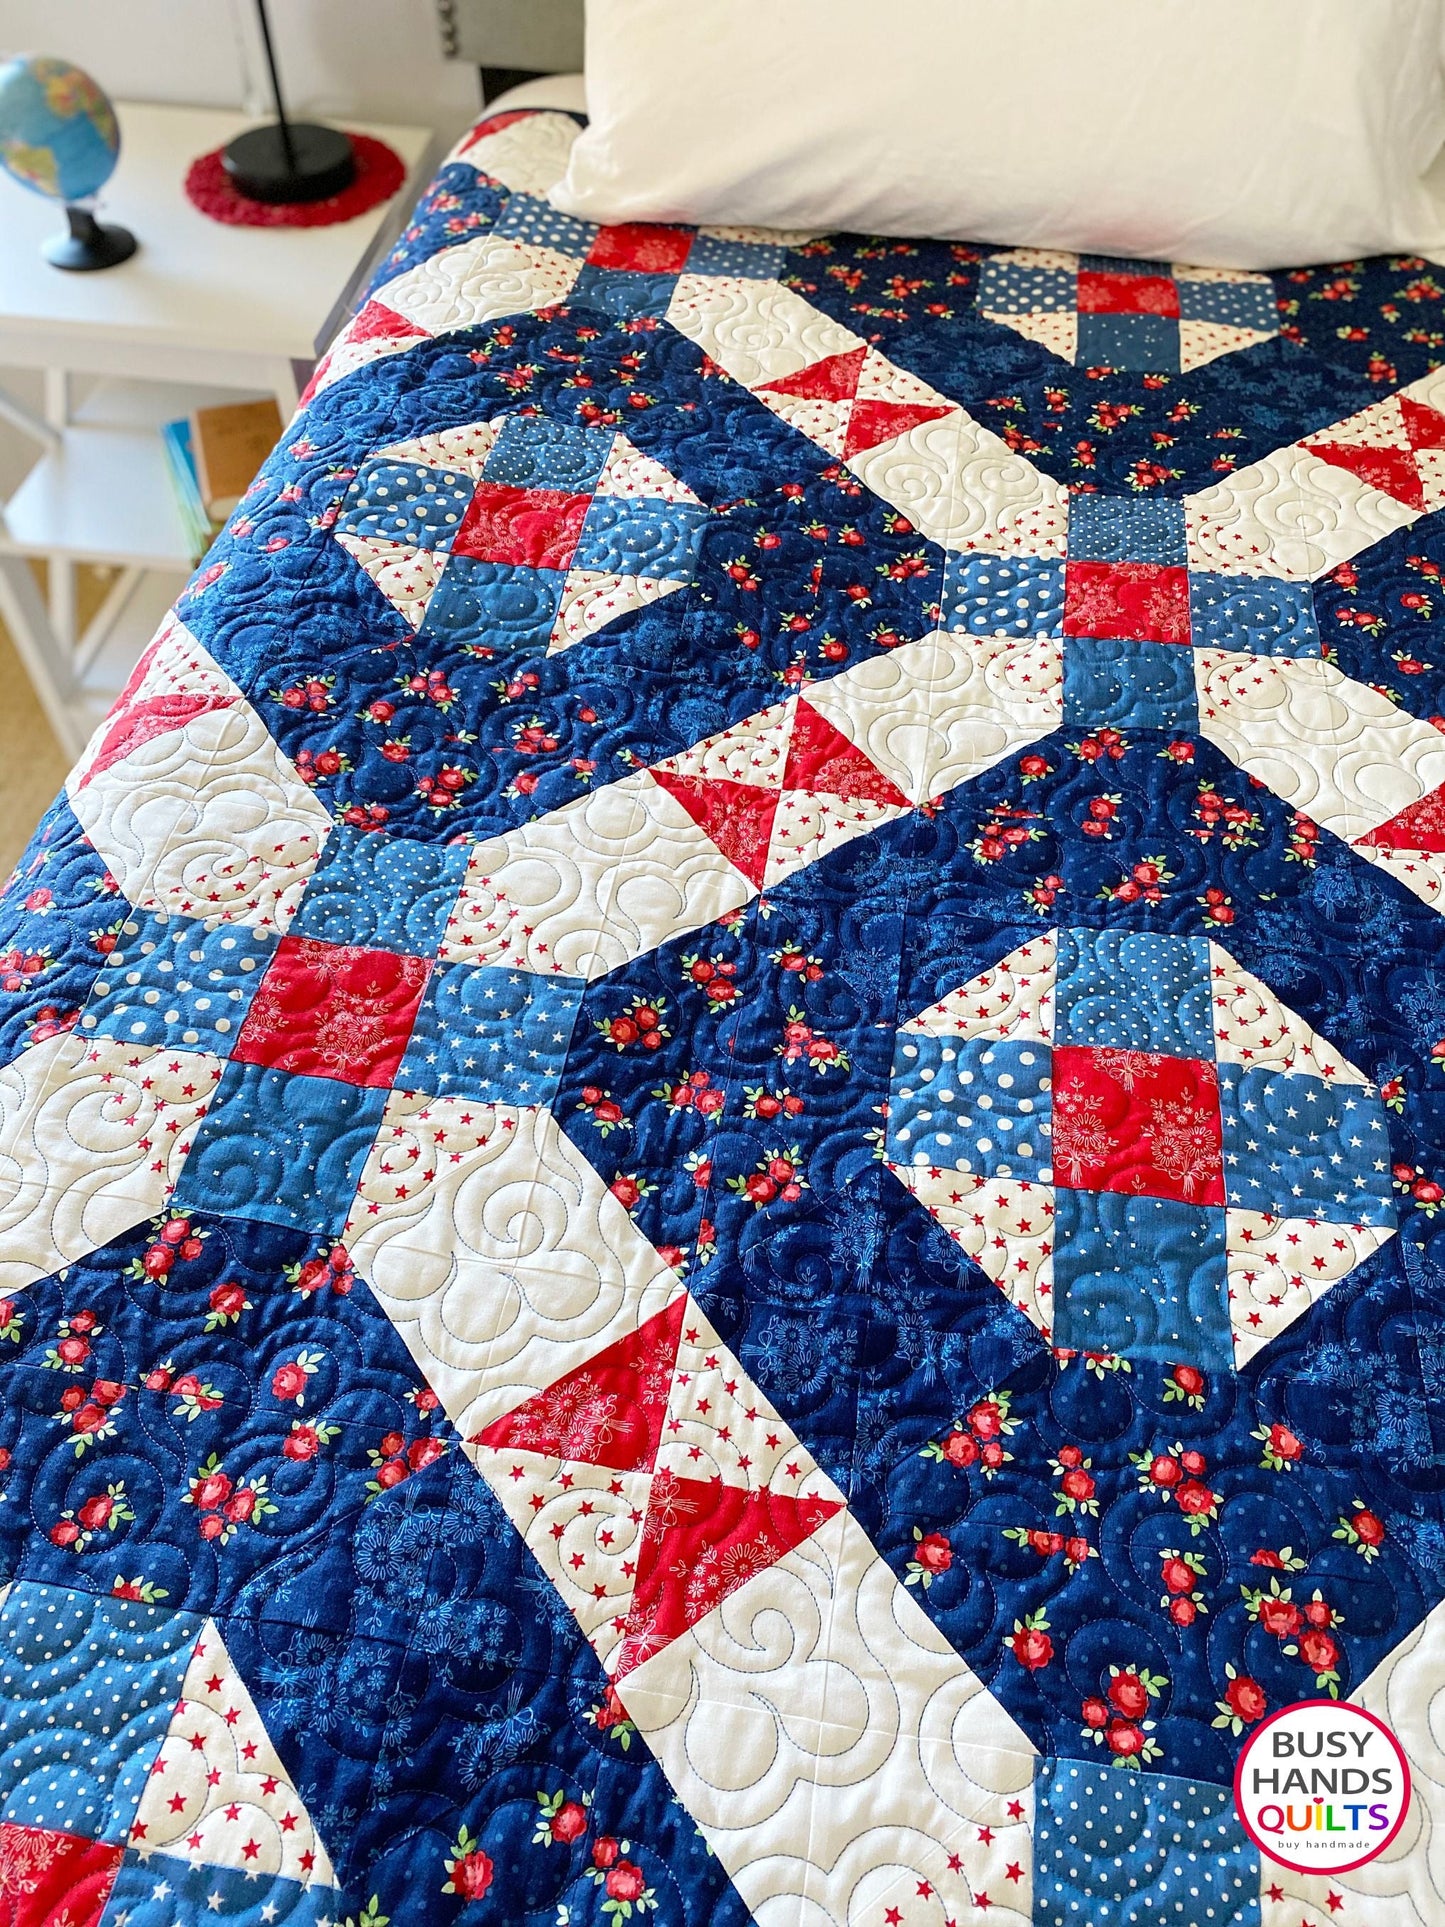 Nantucket Quilt Pattern PDF DOWNLOAD Busy Hands Quilts $12.99